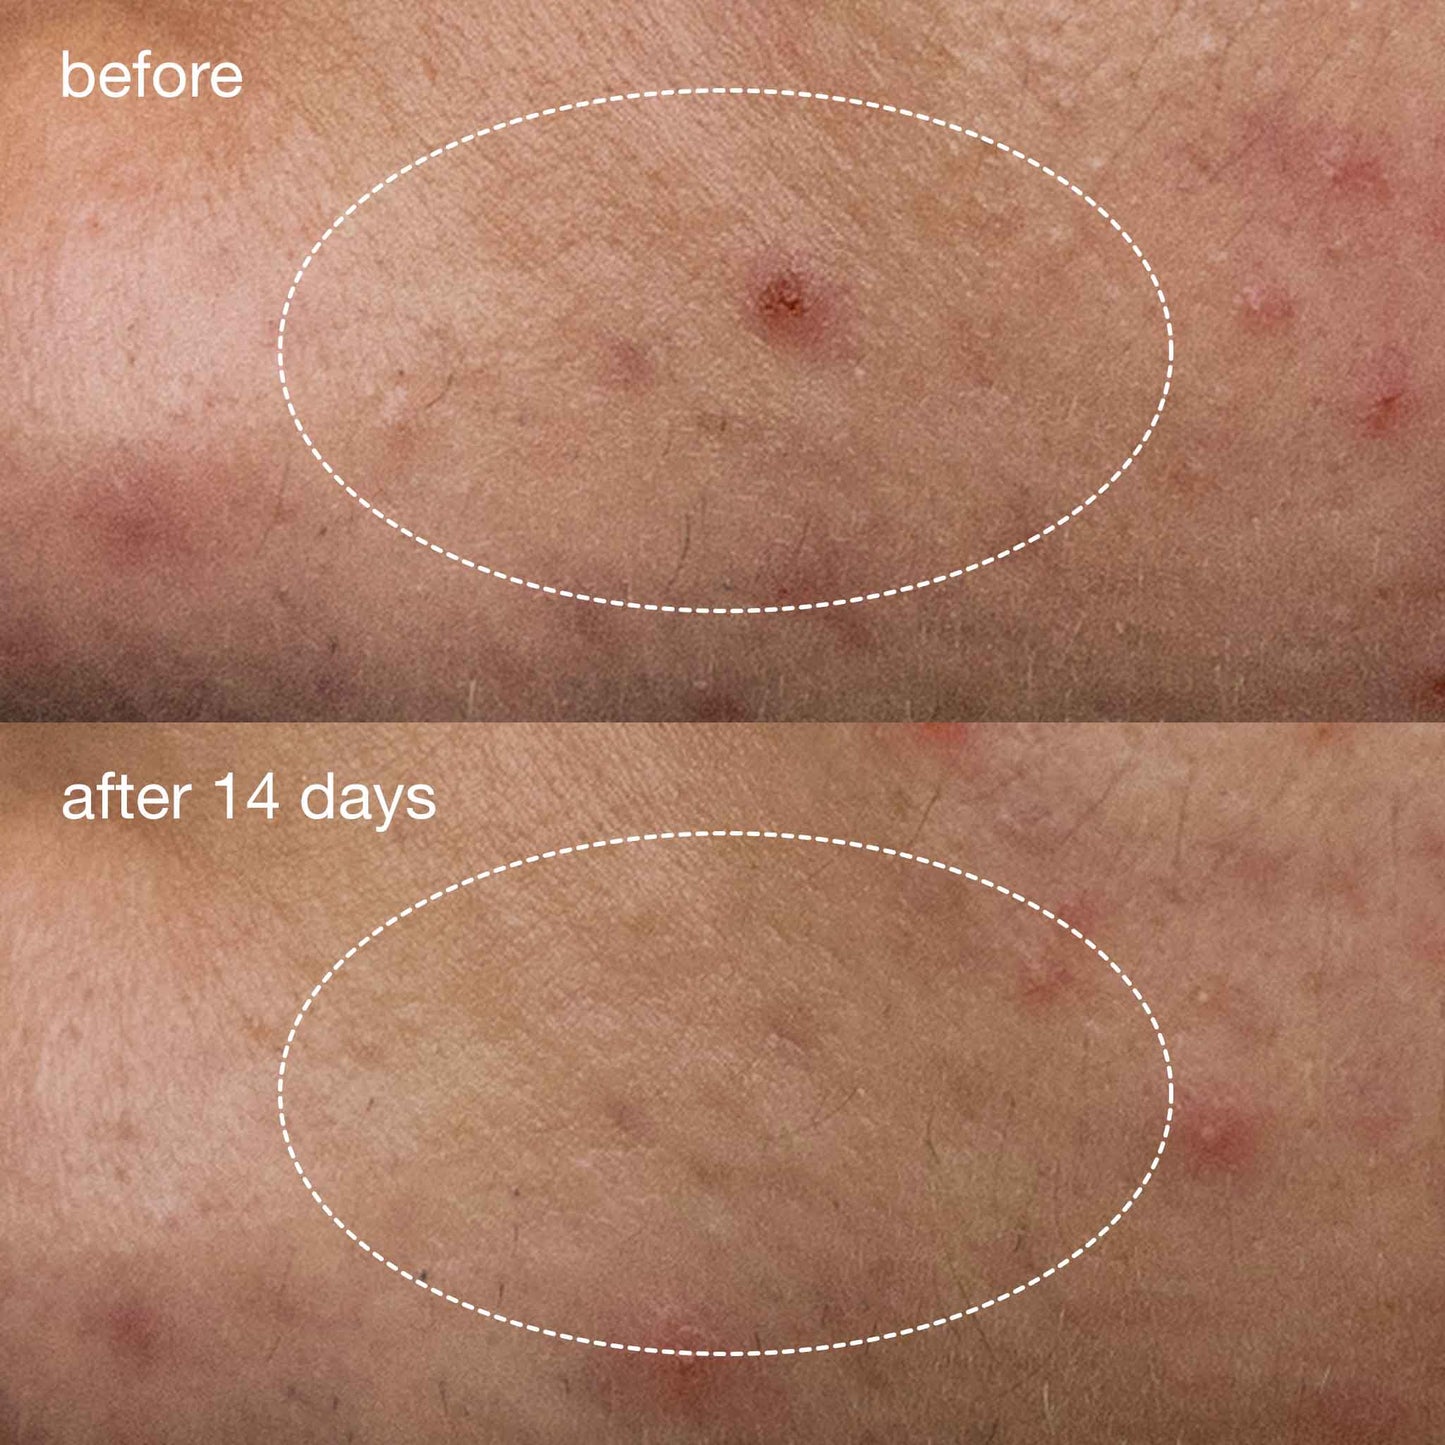 deep acne liquid patch before and after